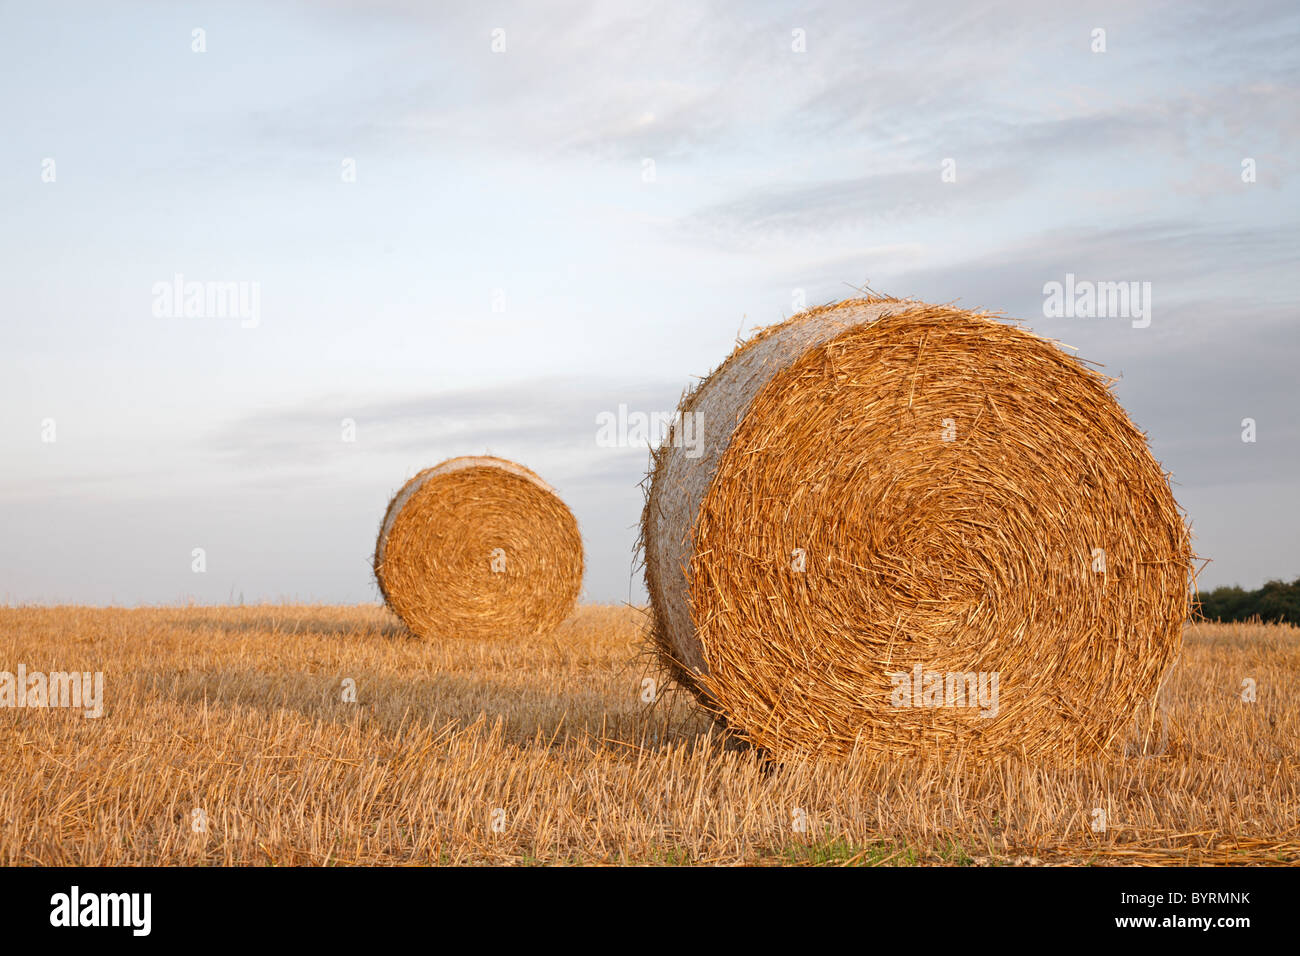 Two big bales of straw on a wheat stubble field in sunset against a blue sky with purplish clouds, Denmark Stock Photo